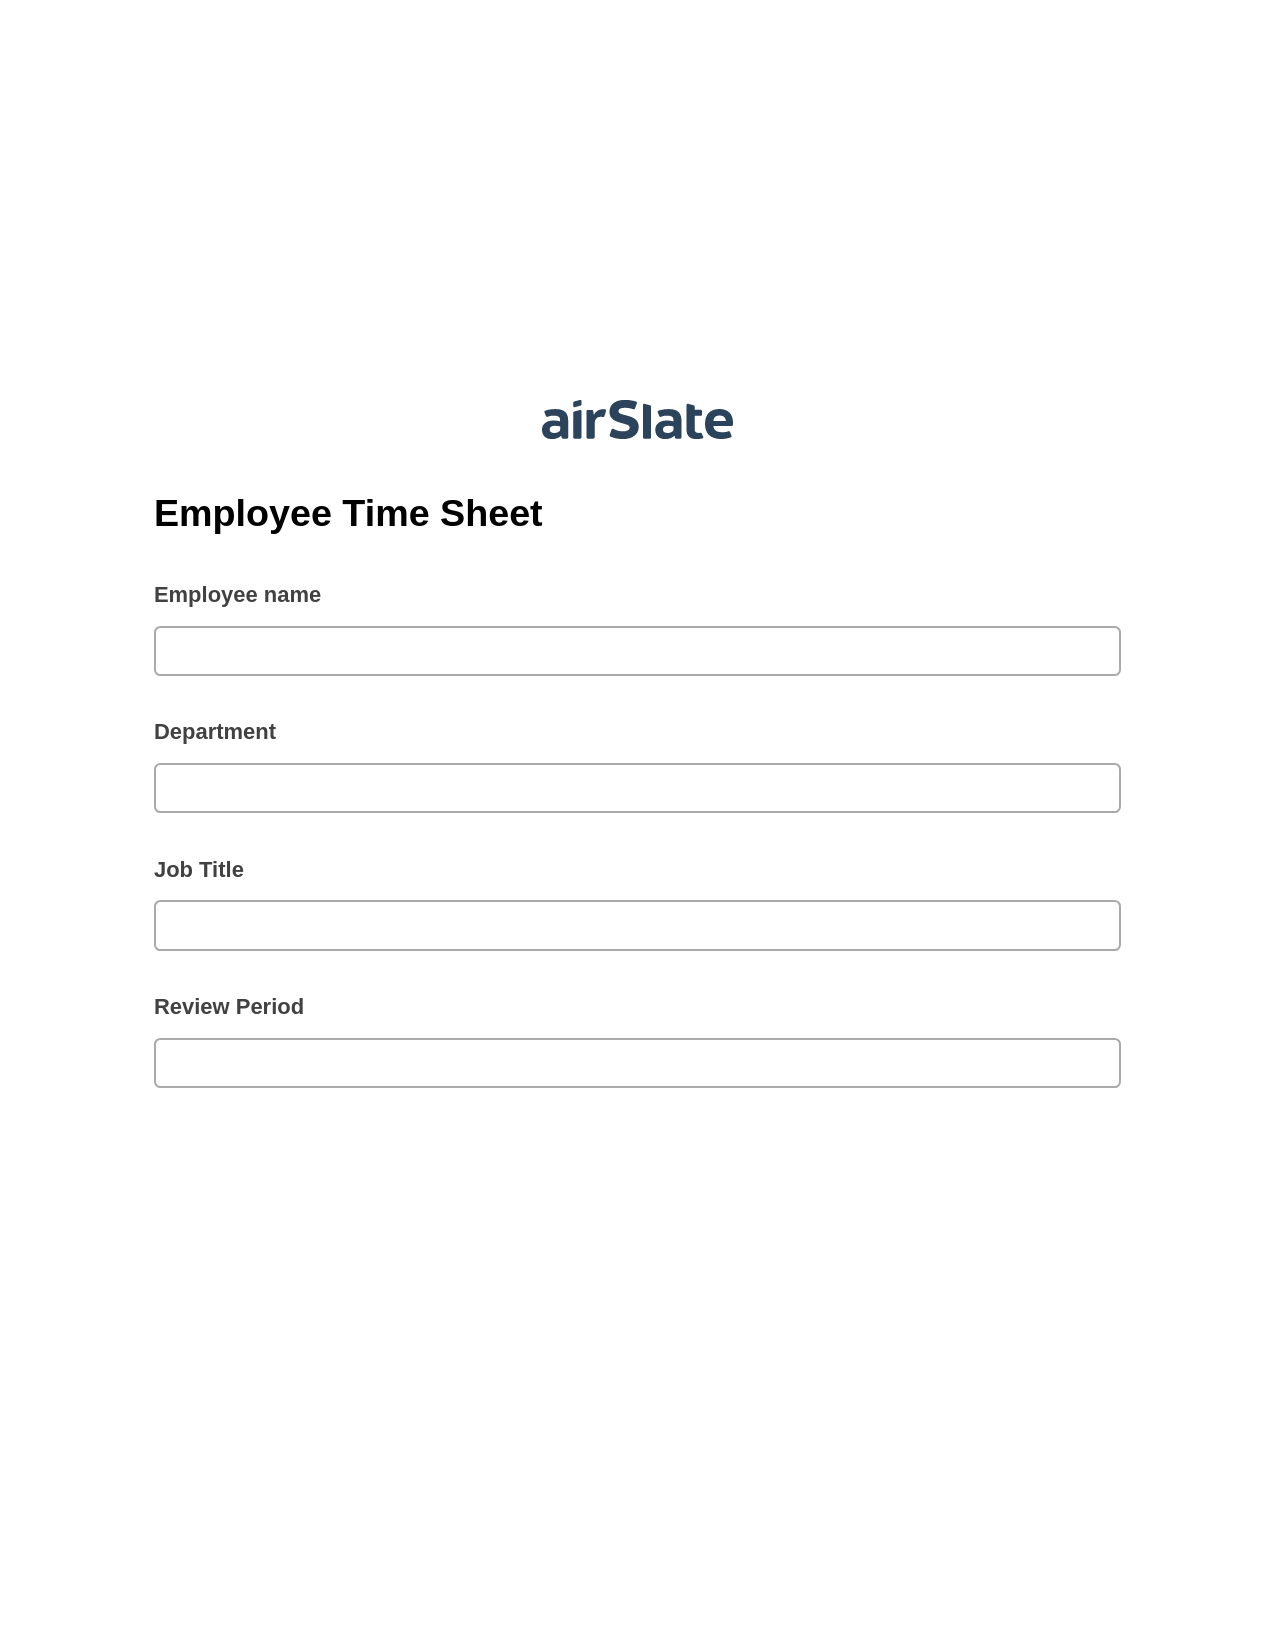 Employee Time Sheet Pre-fill Dropdowns from CSV file Bot, Update Audit Trail Bot, Archive to OneDrive Bot